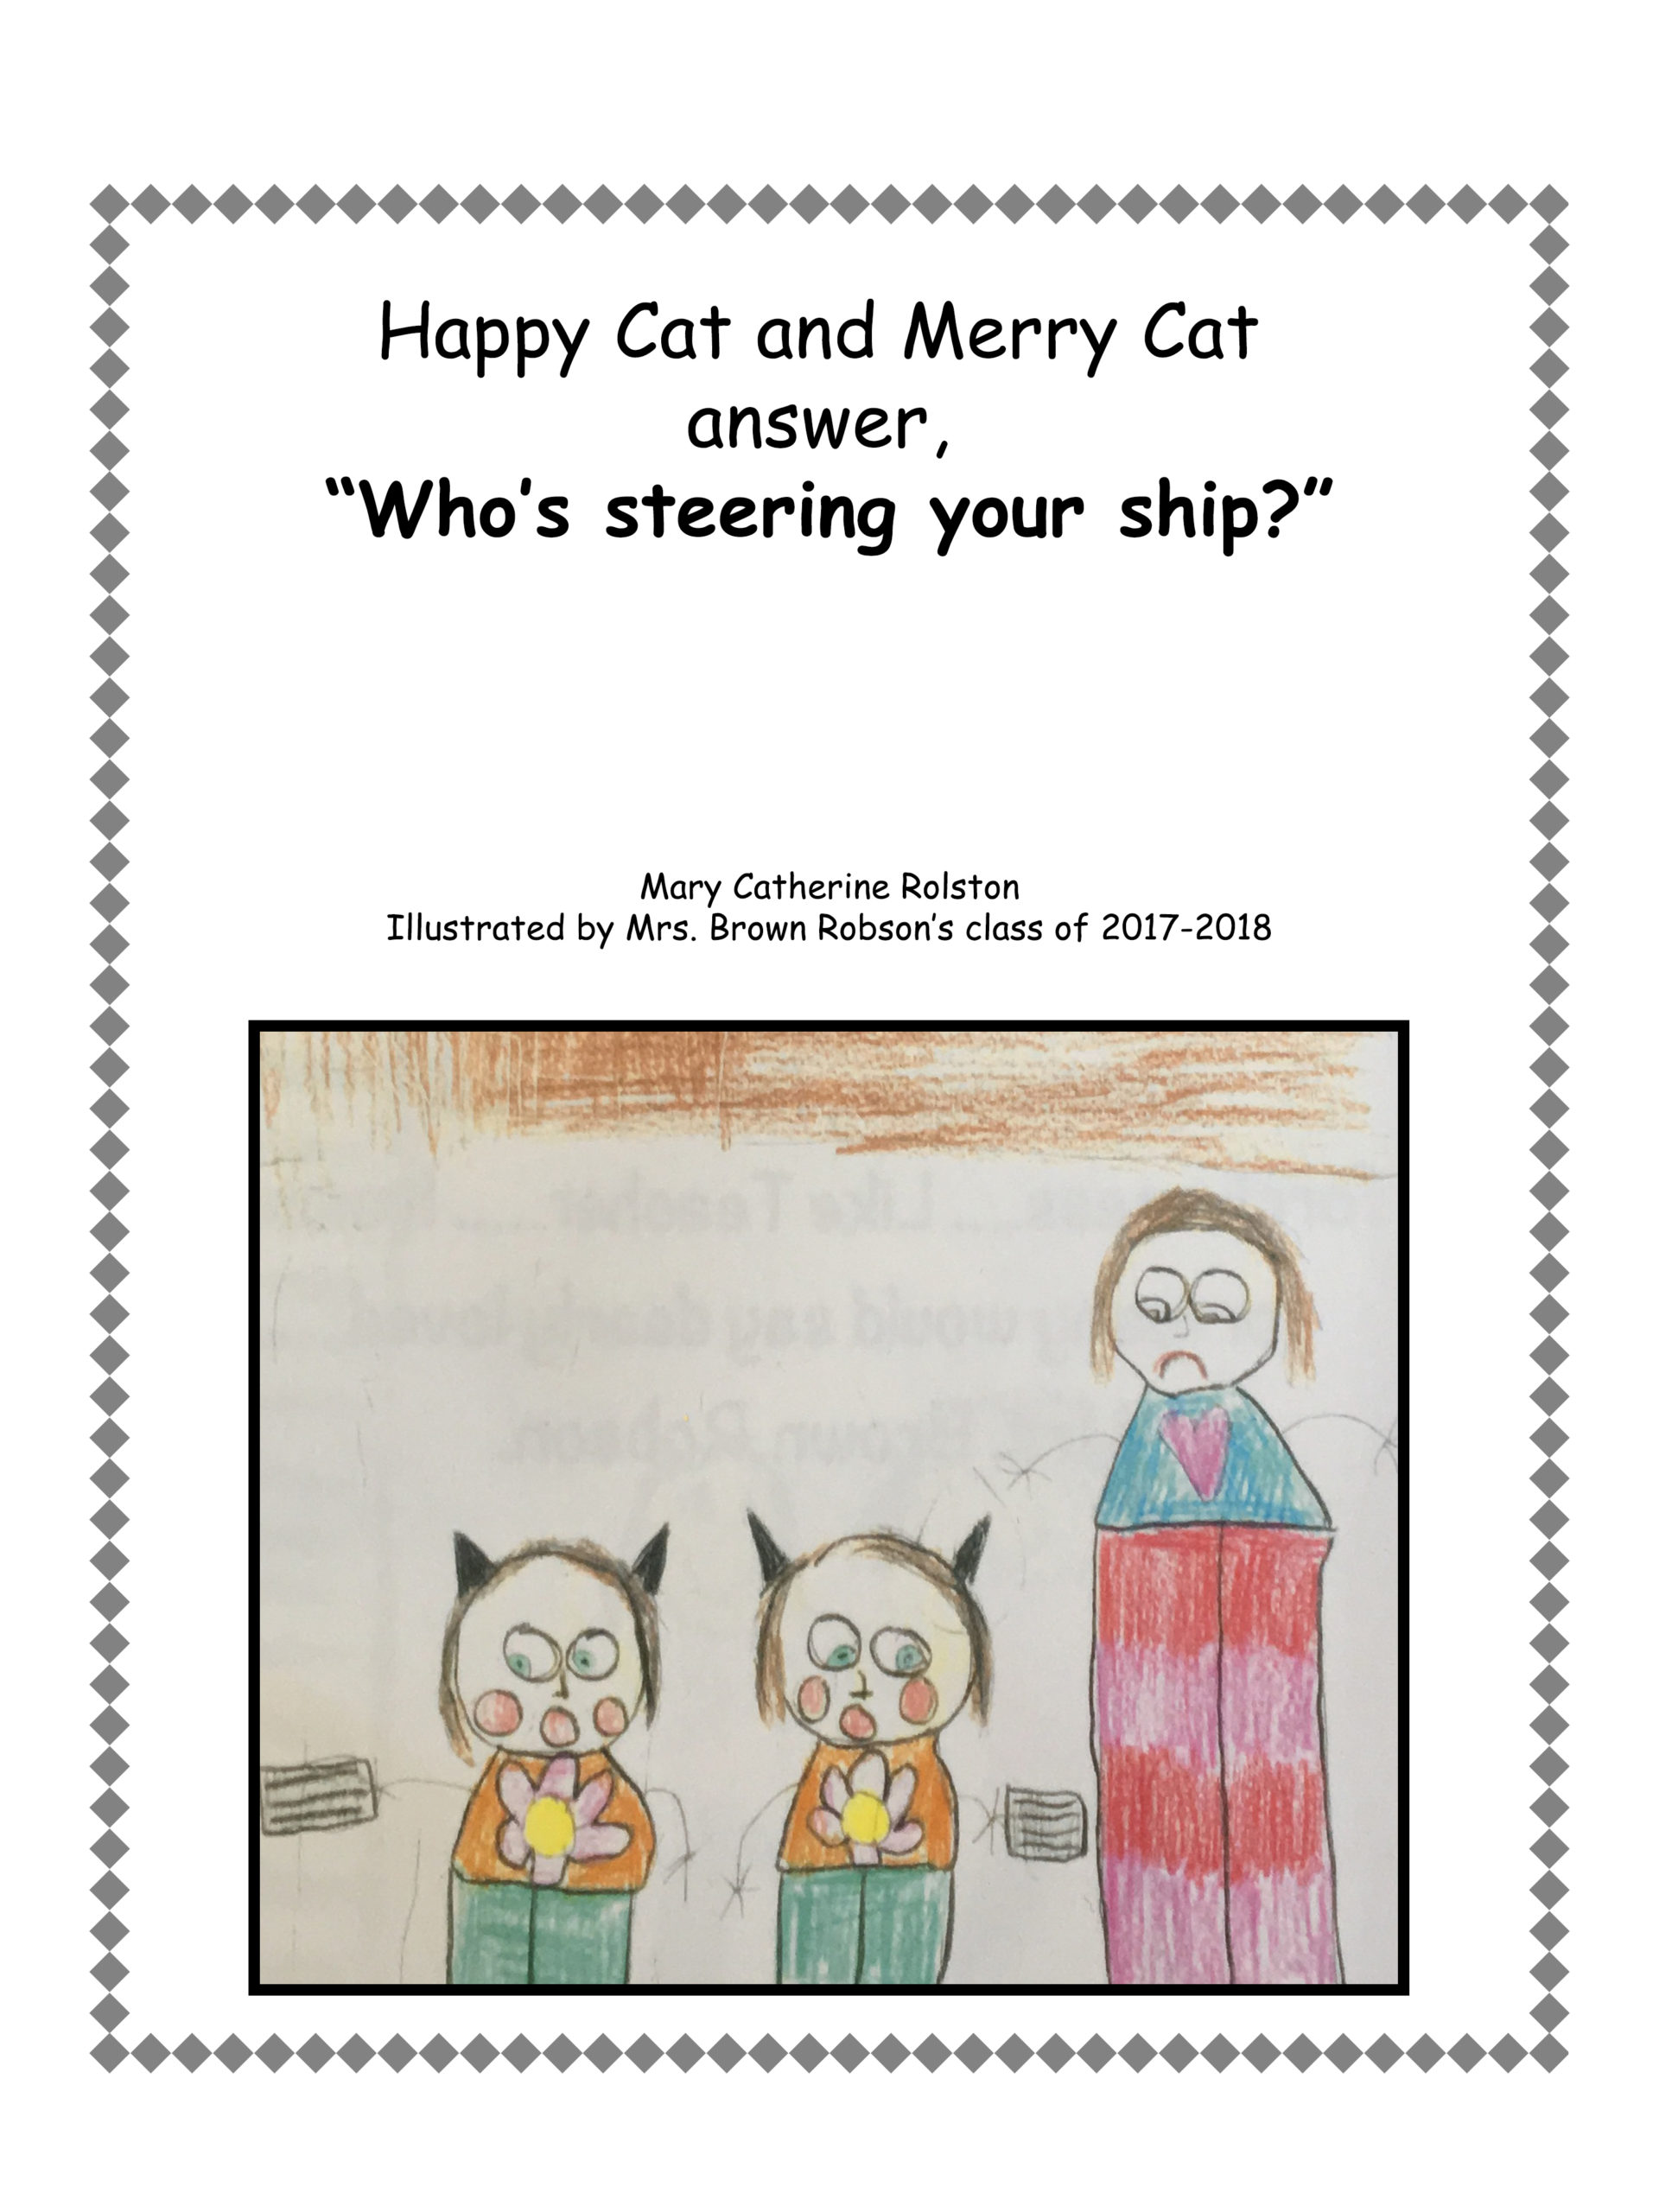 The cover for the children's story "Happy Cat and Merry Cat answer, 'Who's Steering Your Ship?'"